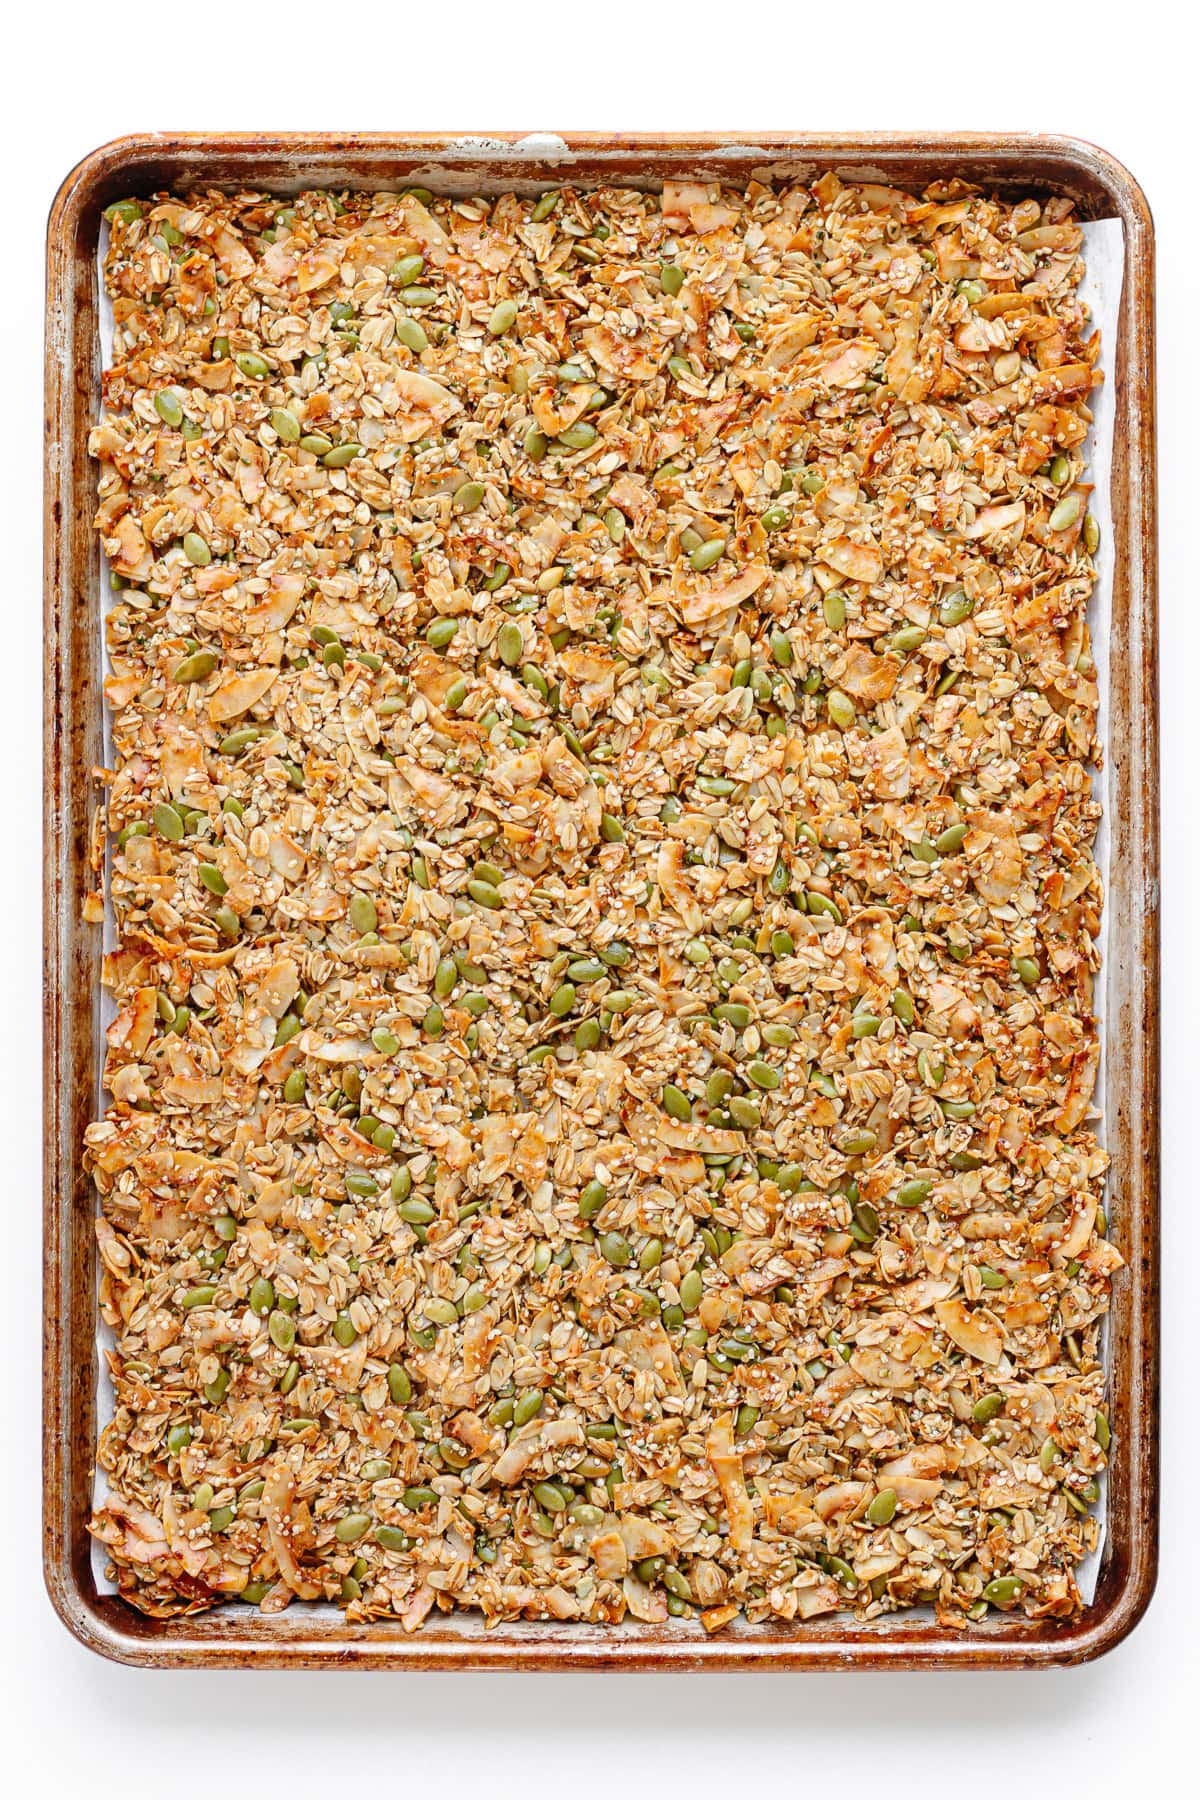 Baked vanilla coconut granola on large baking sheet before being broken up into clusters.